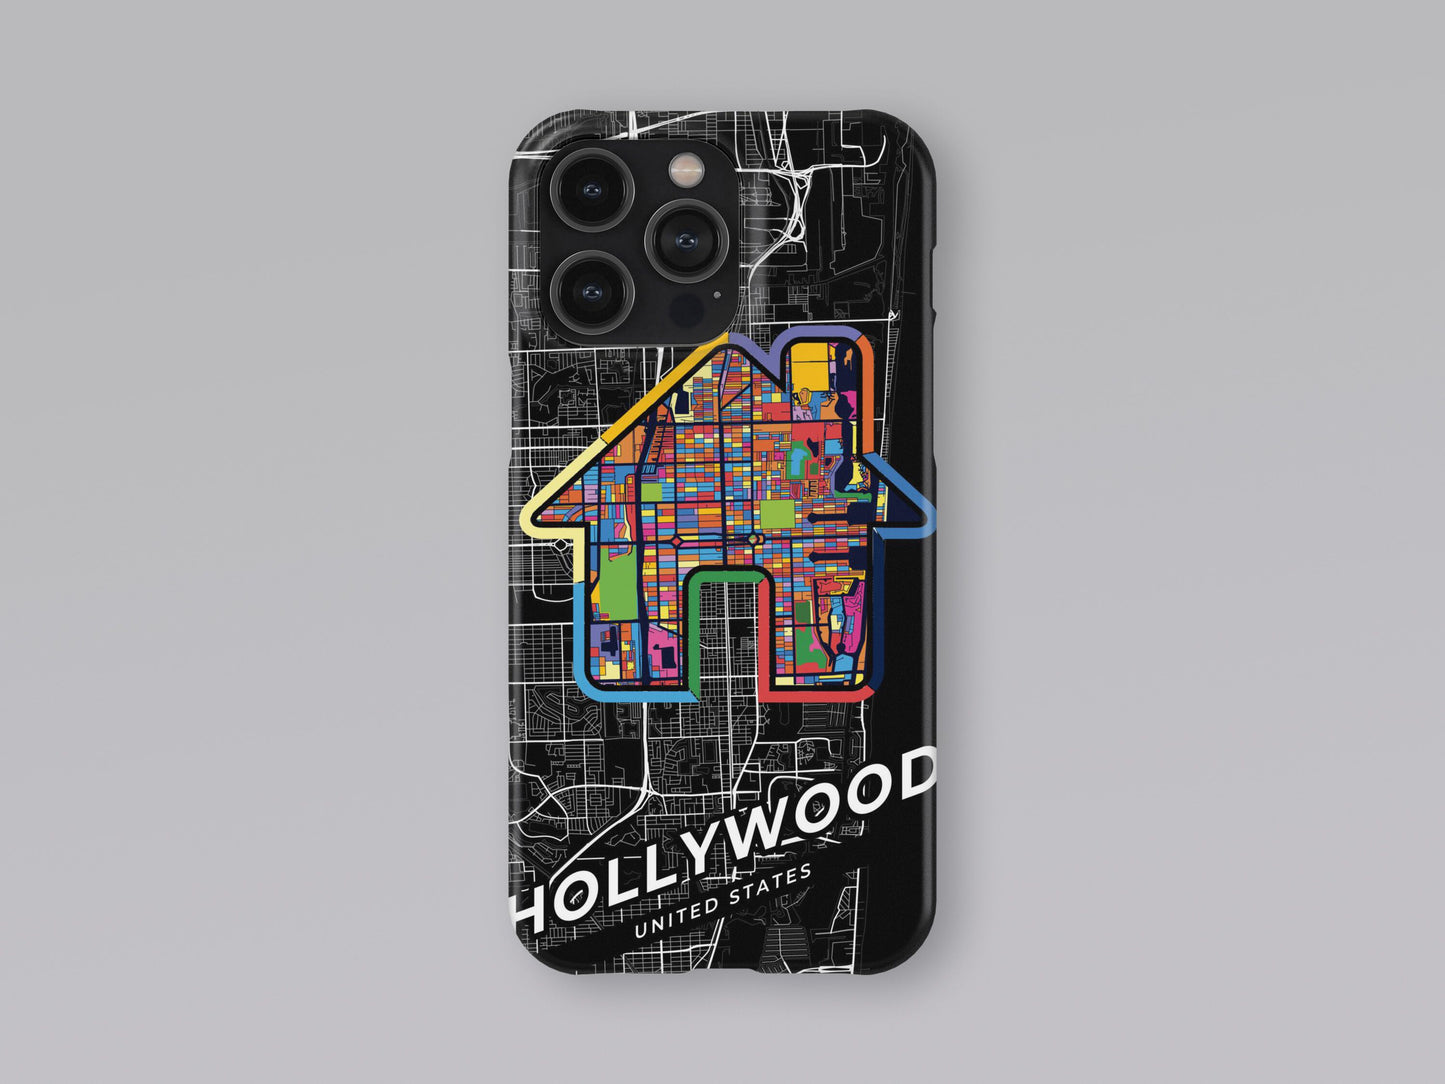 Hollywood Florida slim phone case with colorful icon. Birthday, wedding or housewarming gift. Couple match cases. 3